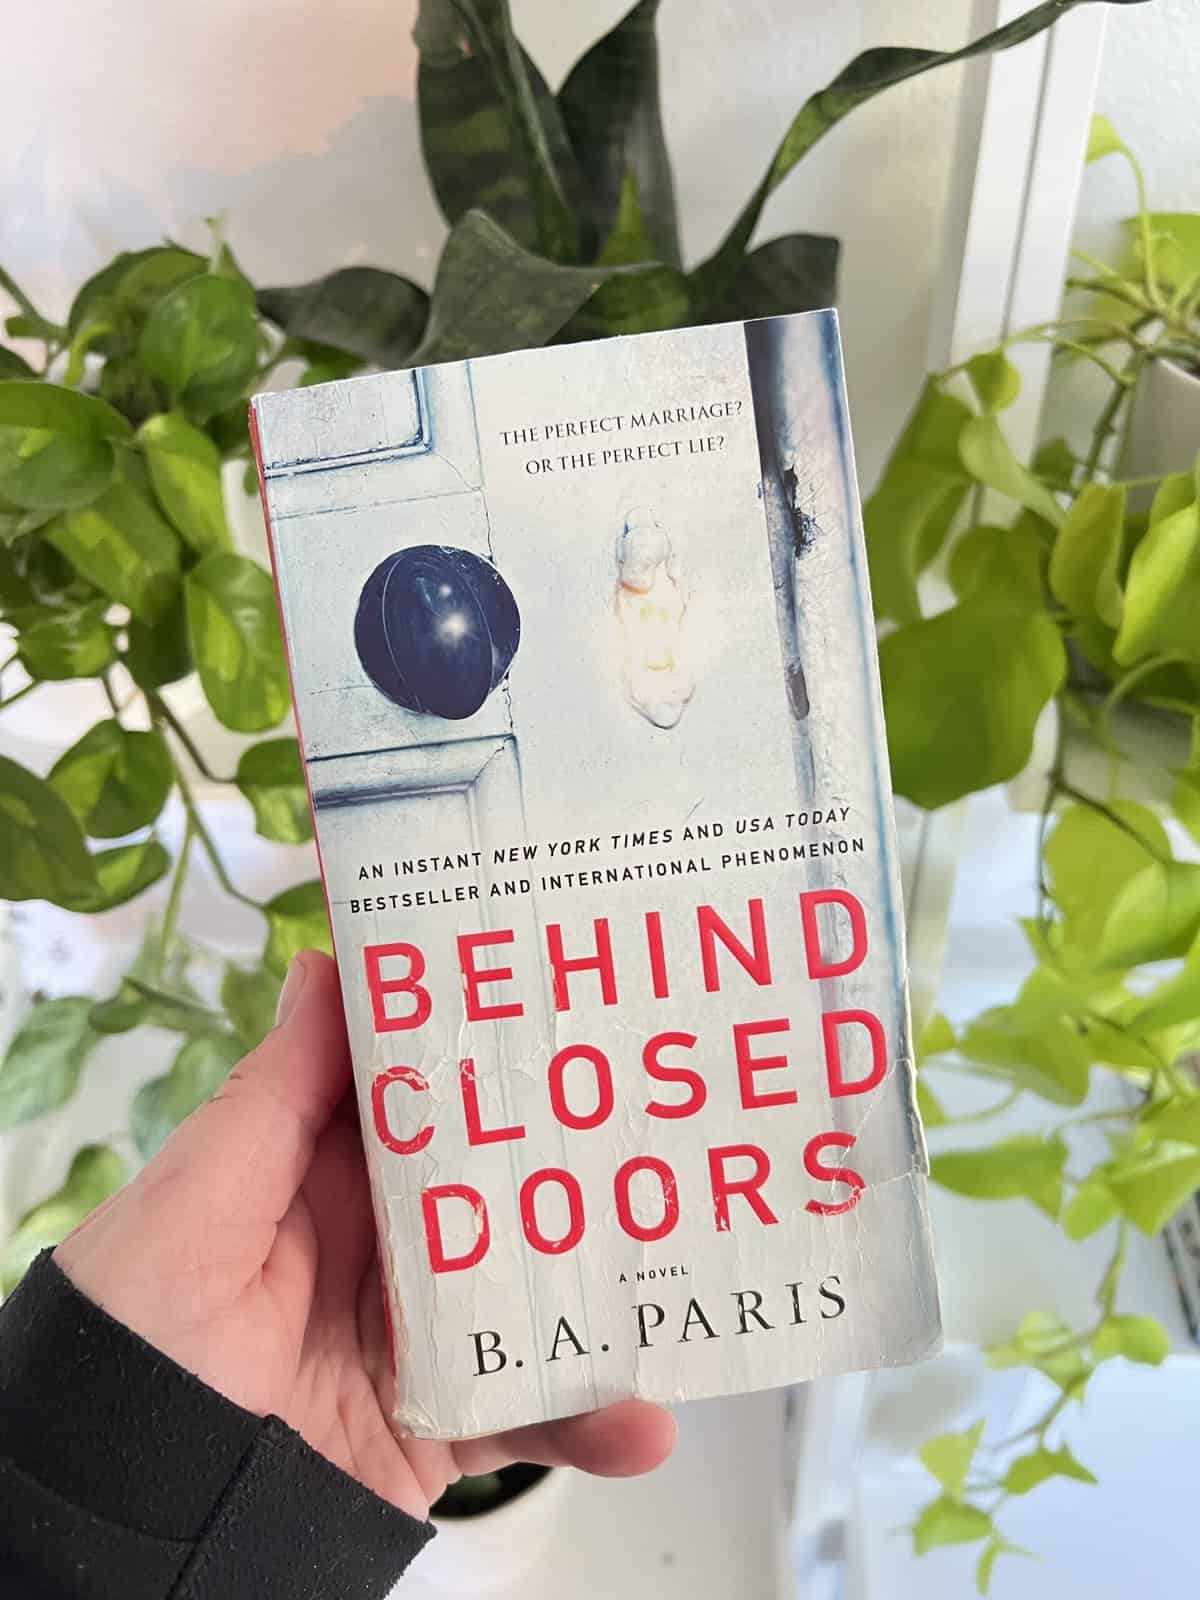 A paperback book of Behind Closed Doors by B.A Paris with a bunch of green plants behind it.